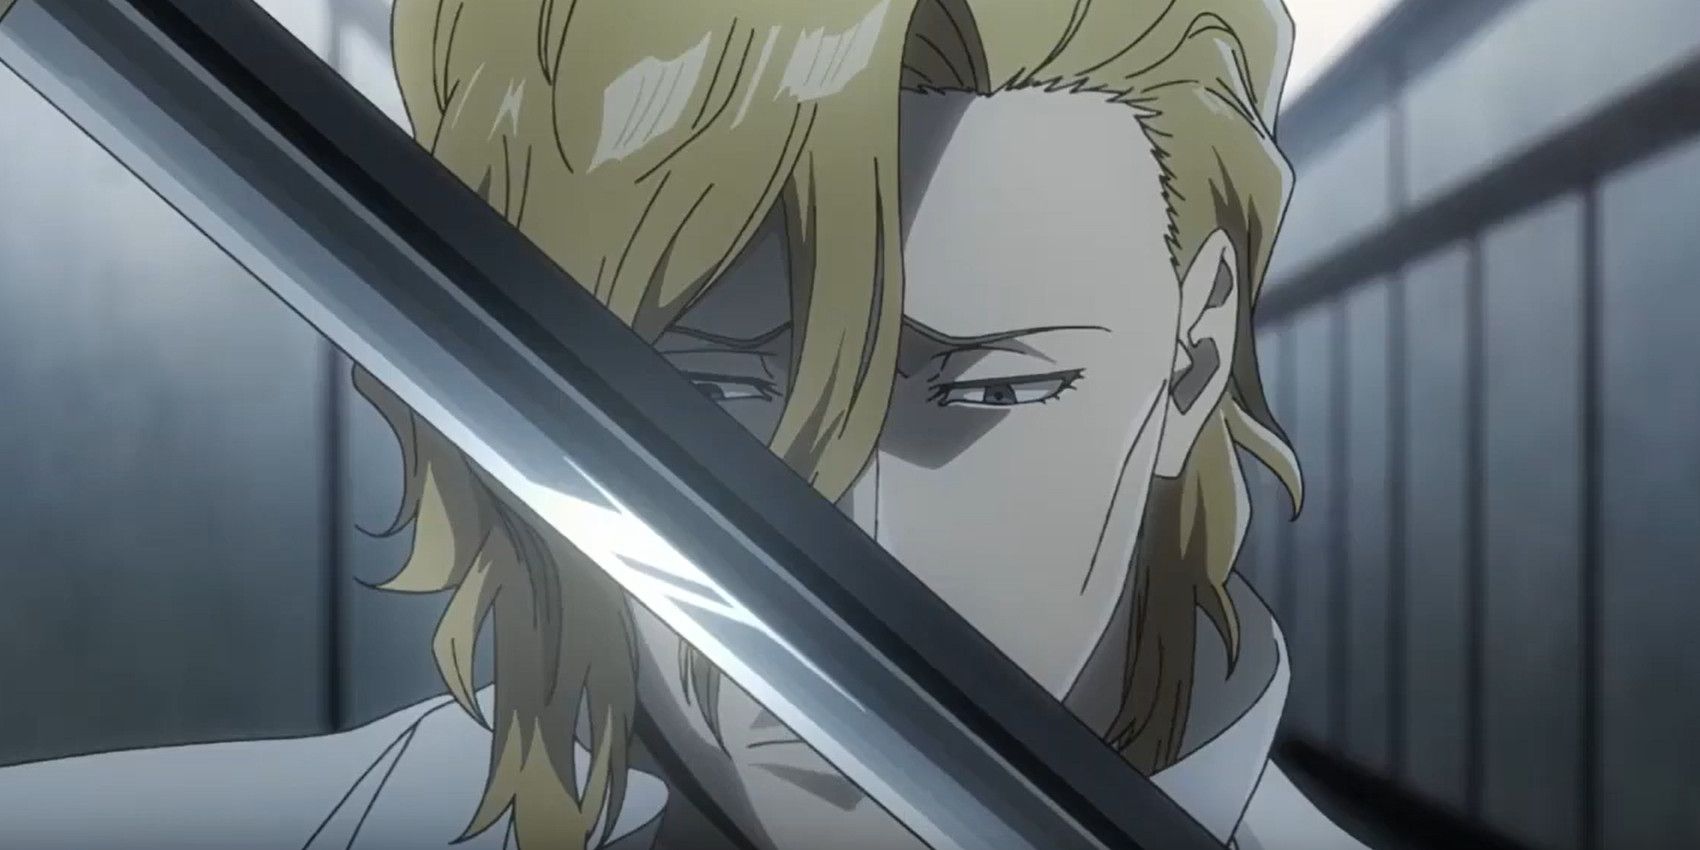 Rose from bleach looking at sword